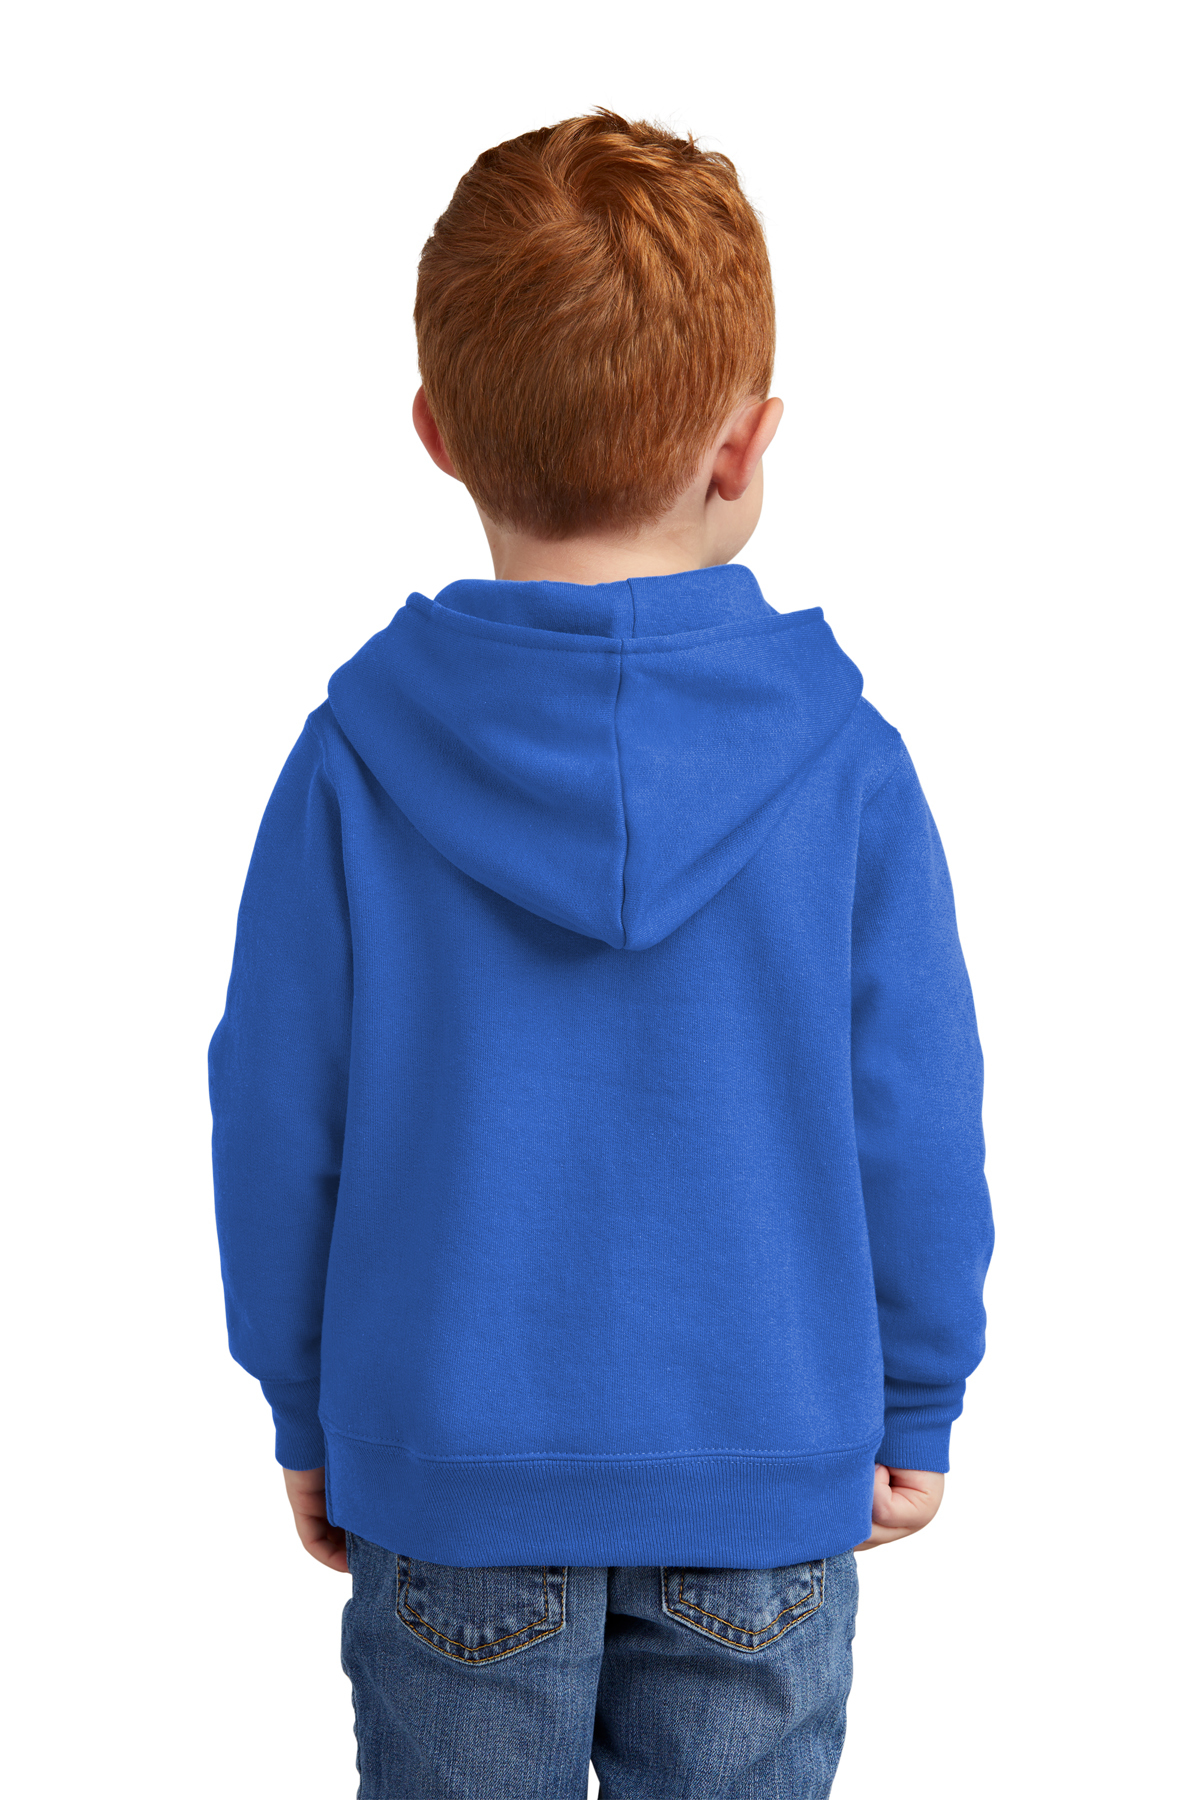 Hooded | & Toddler Sweatshirt Pullover Fleece & Core | Product Company Port Company Port